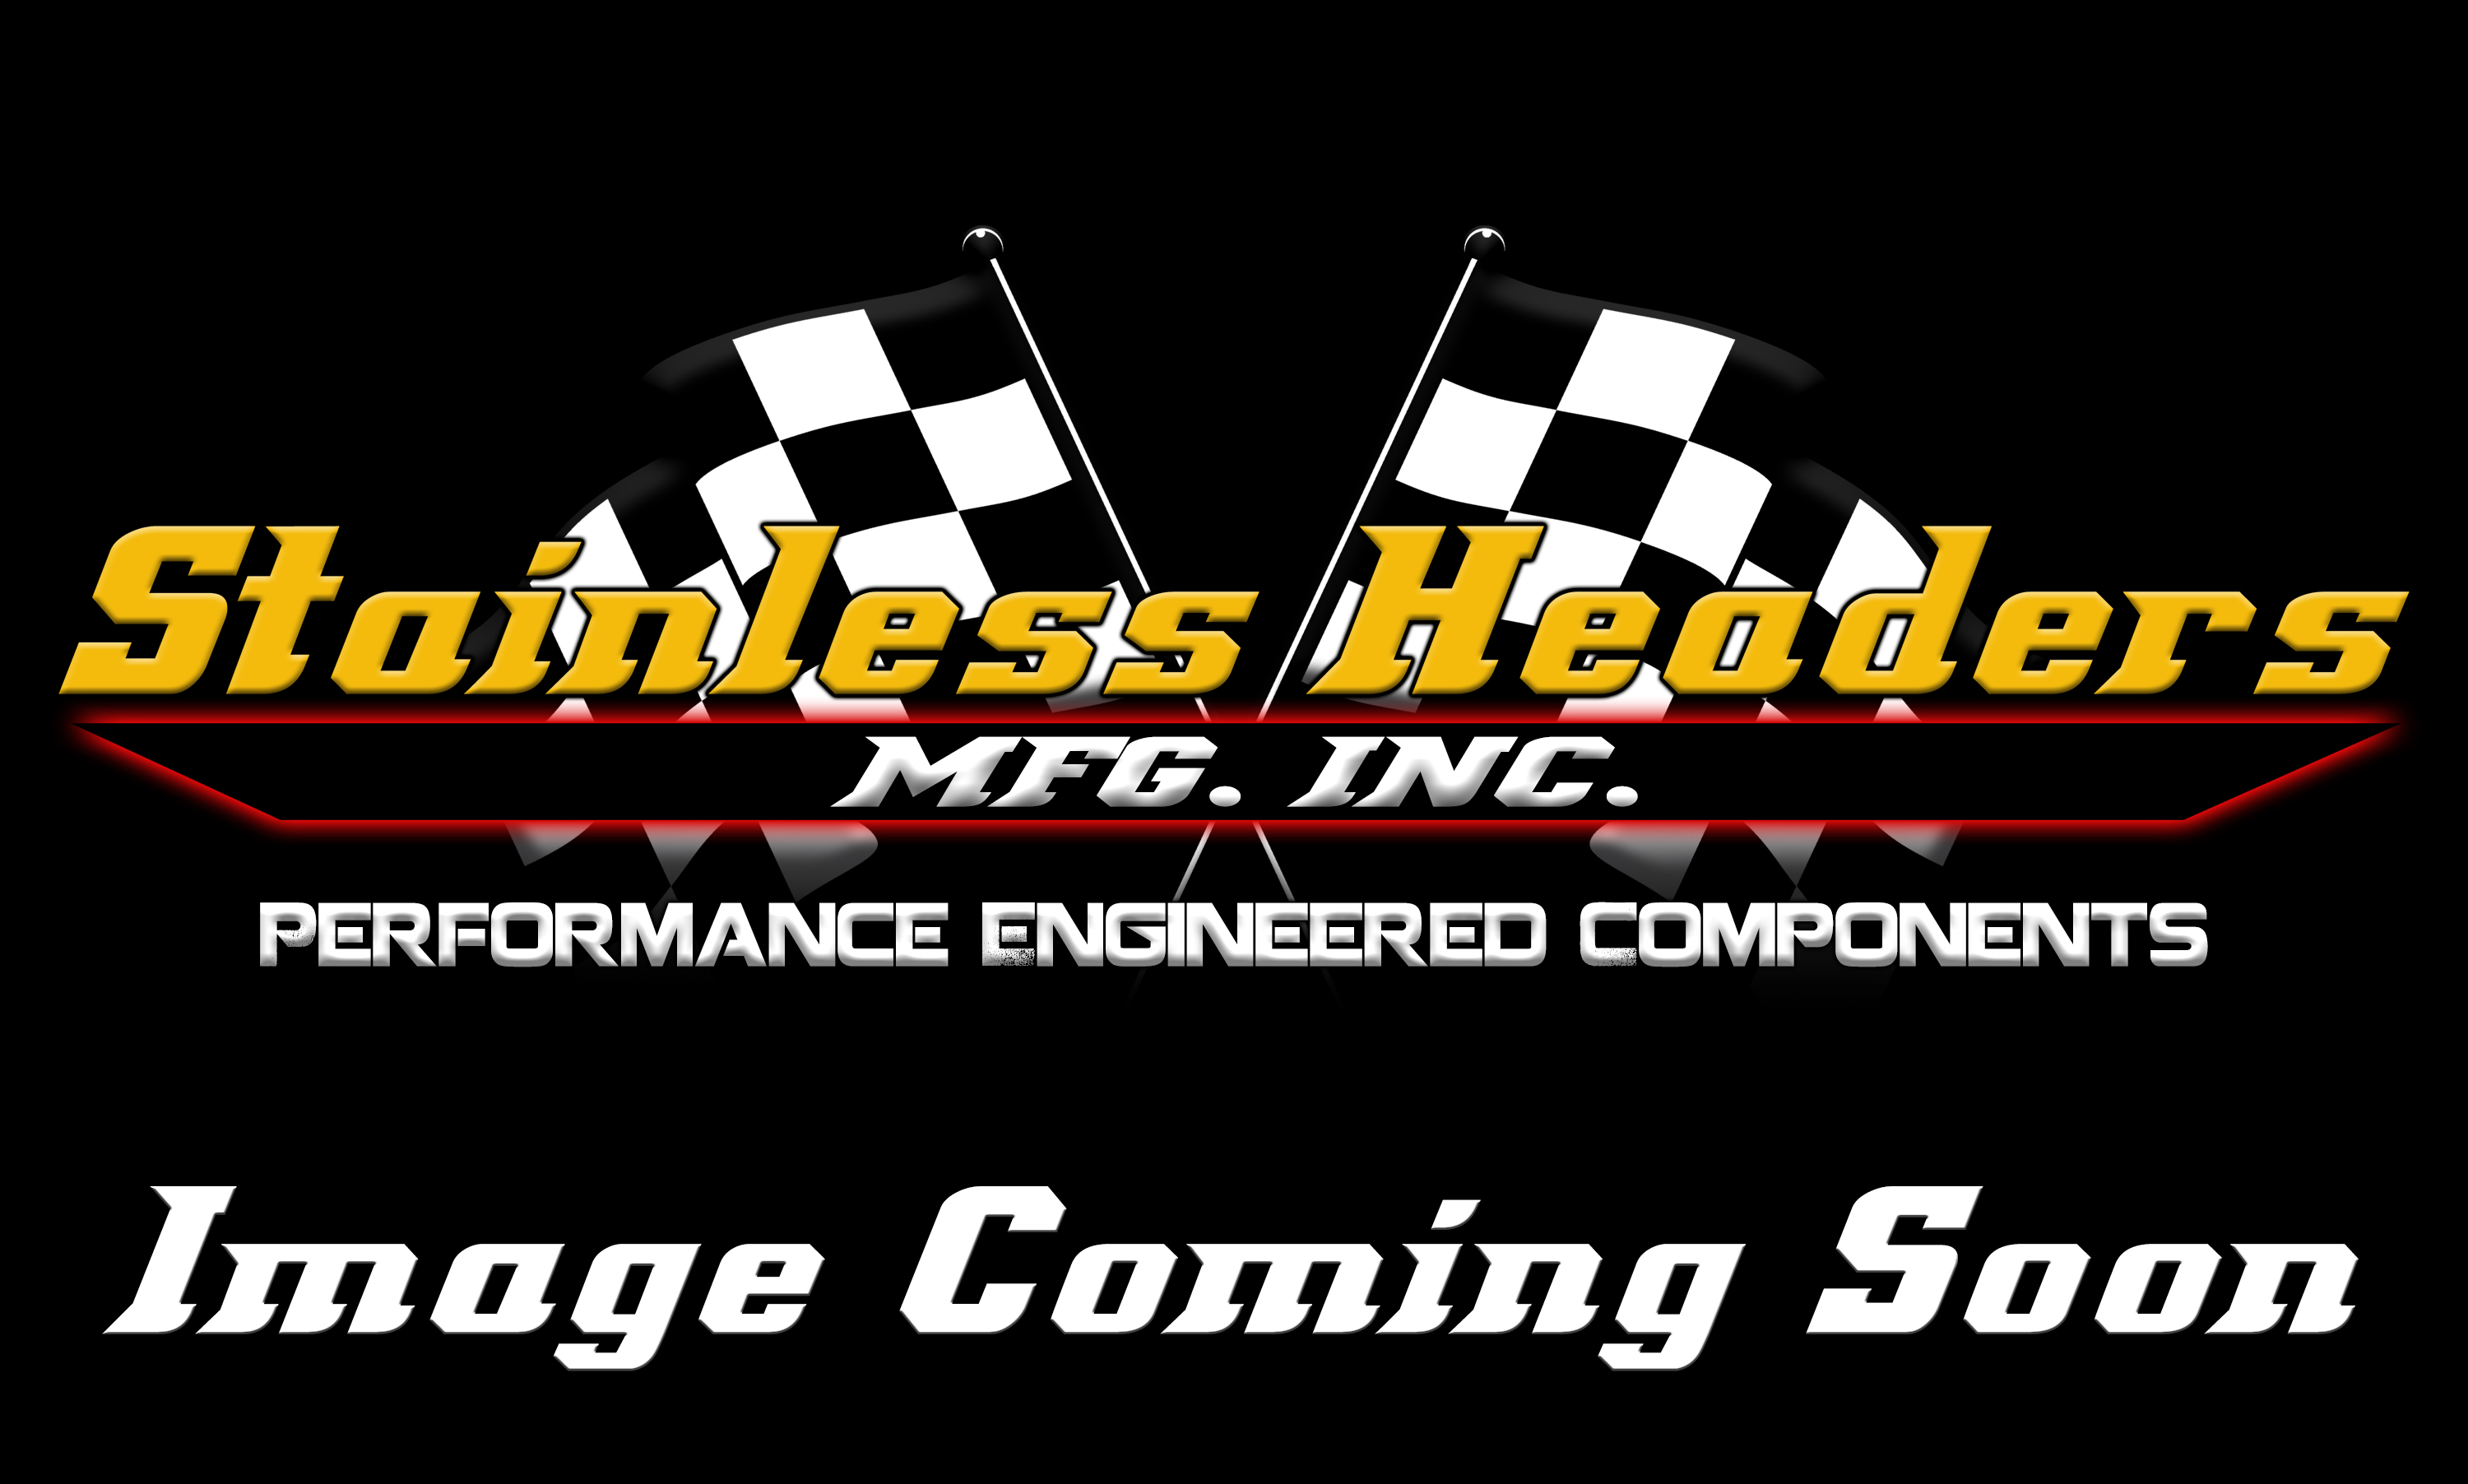 CompTurbo Technologies - CTR4204R-7490 Mid Frame Oil Lubricated 2.0 Turbocharger (1300 HP)